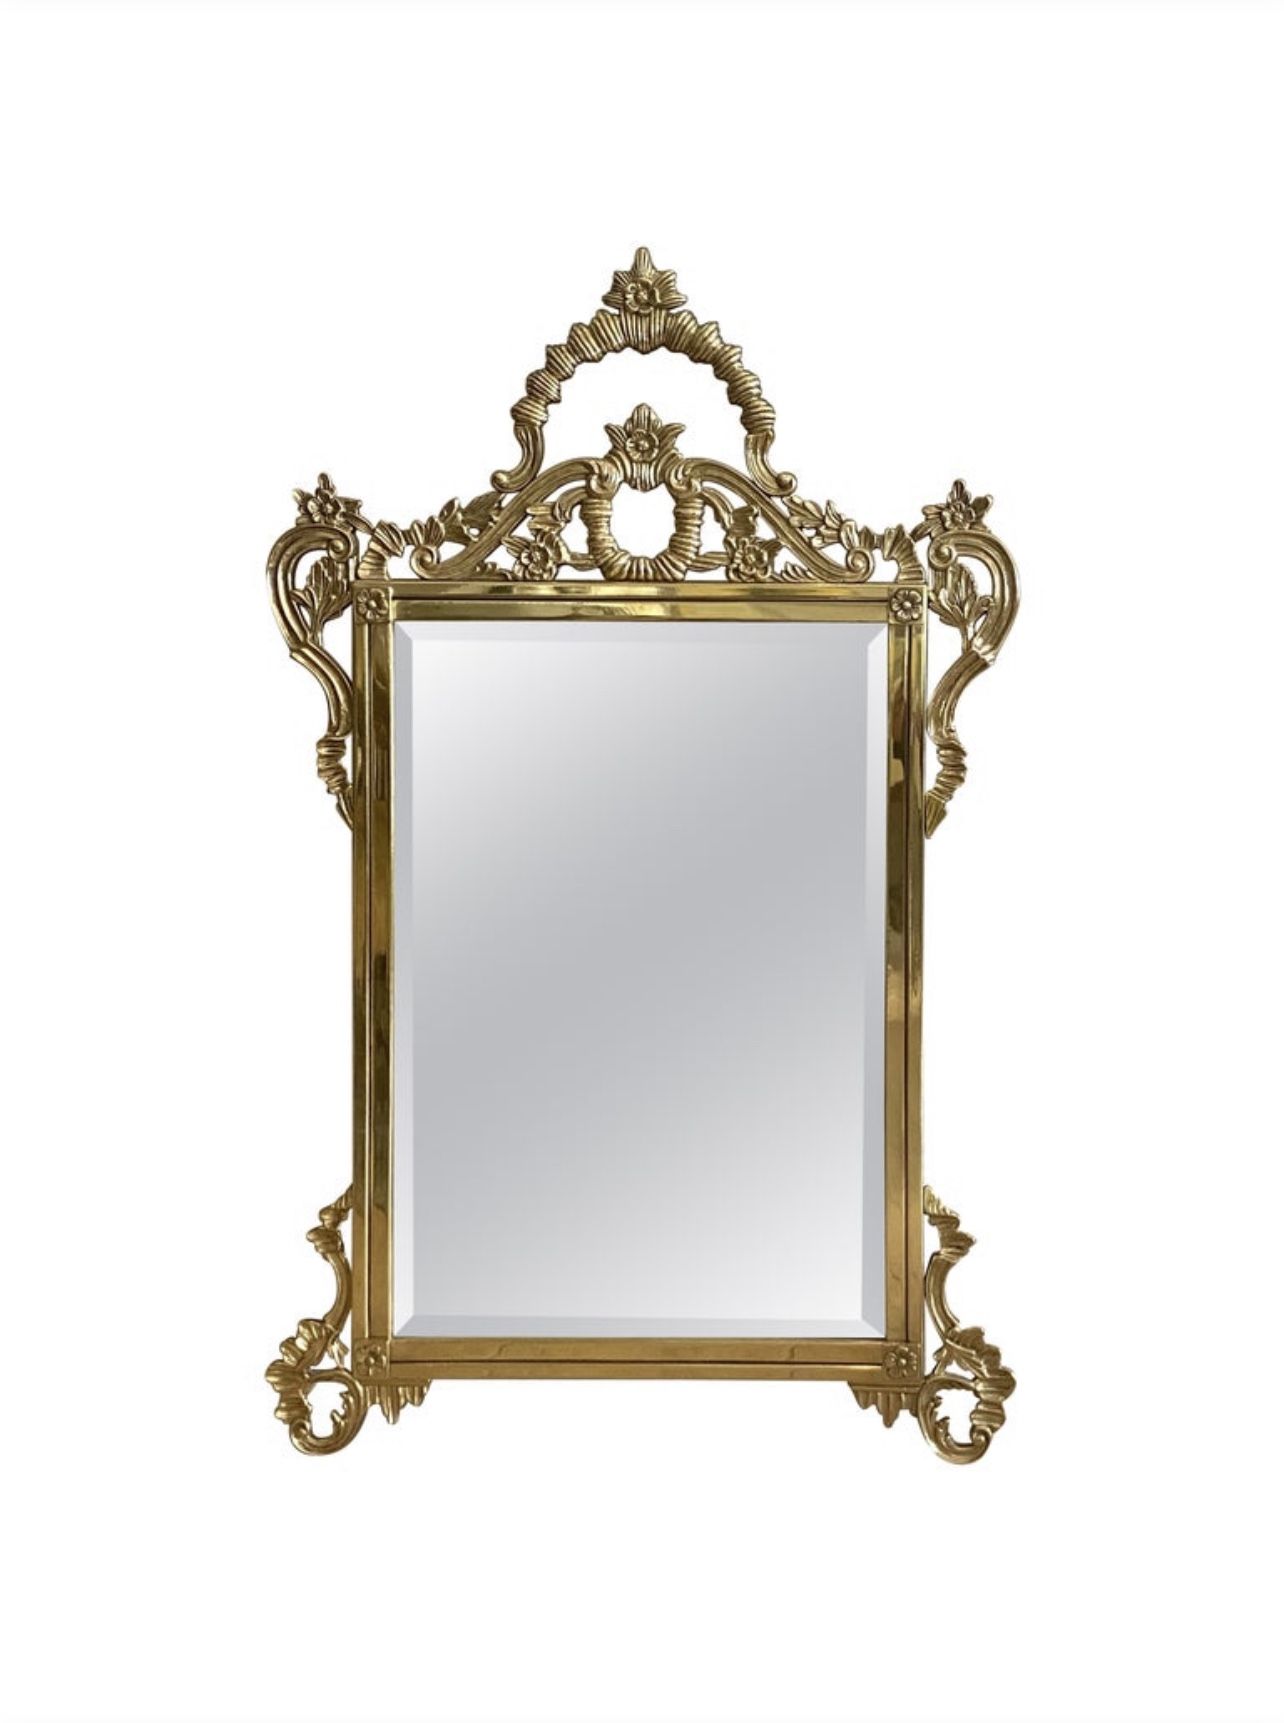 Solid Brass French Rococo Wall Mirror